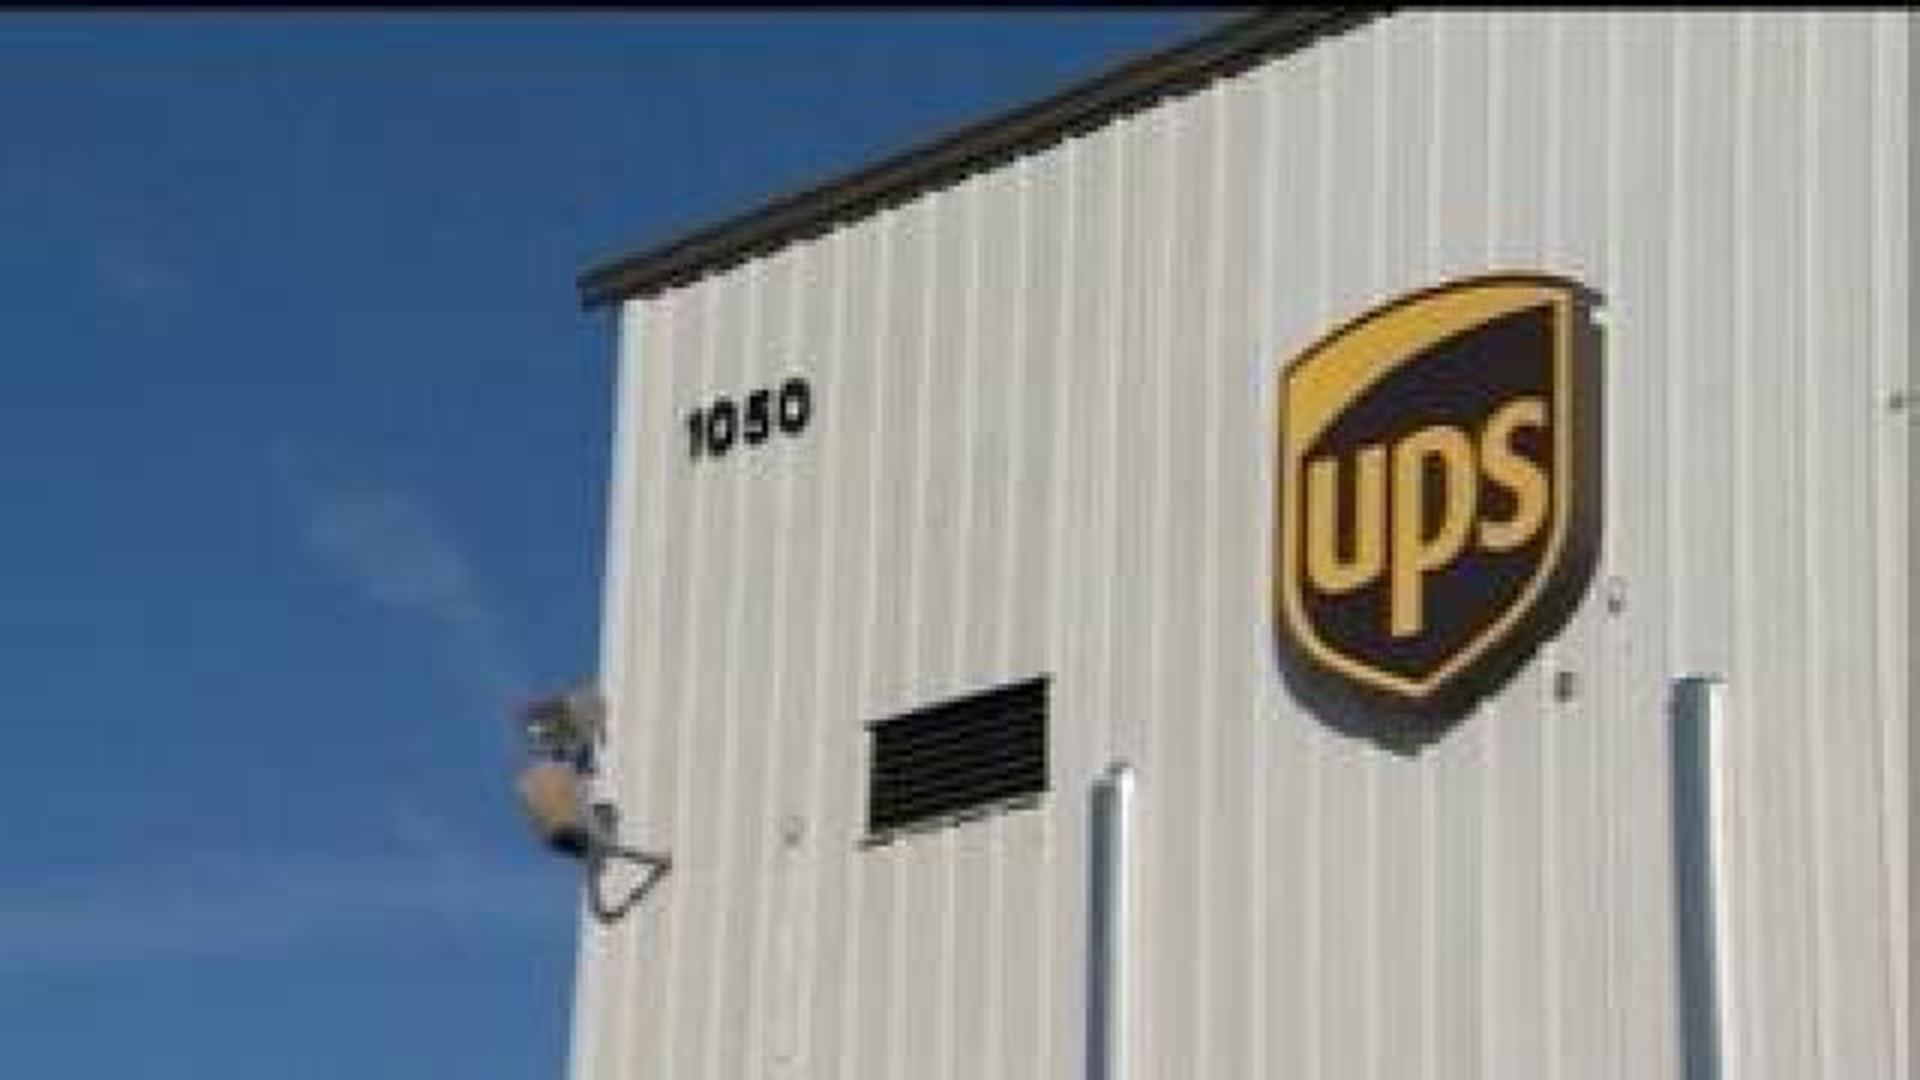 High volumes of packages delivered day after Christmas